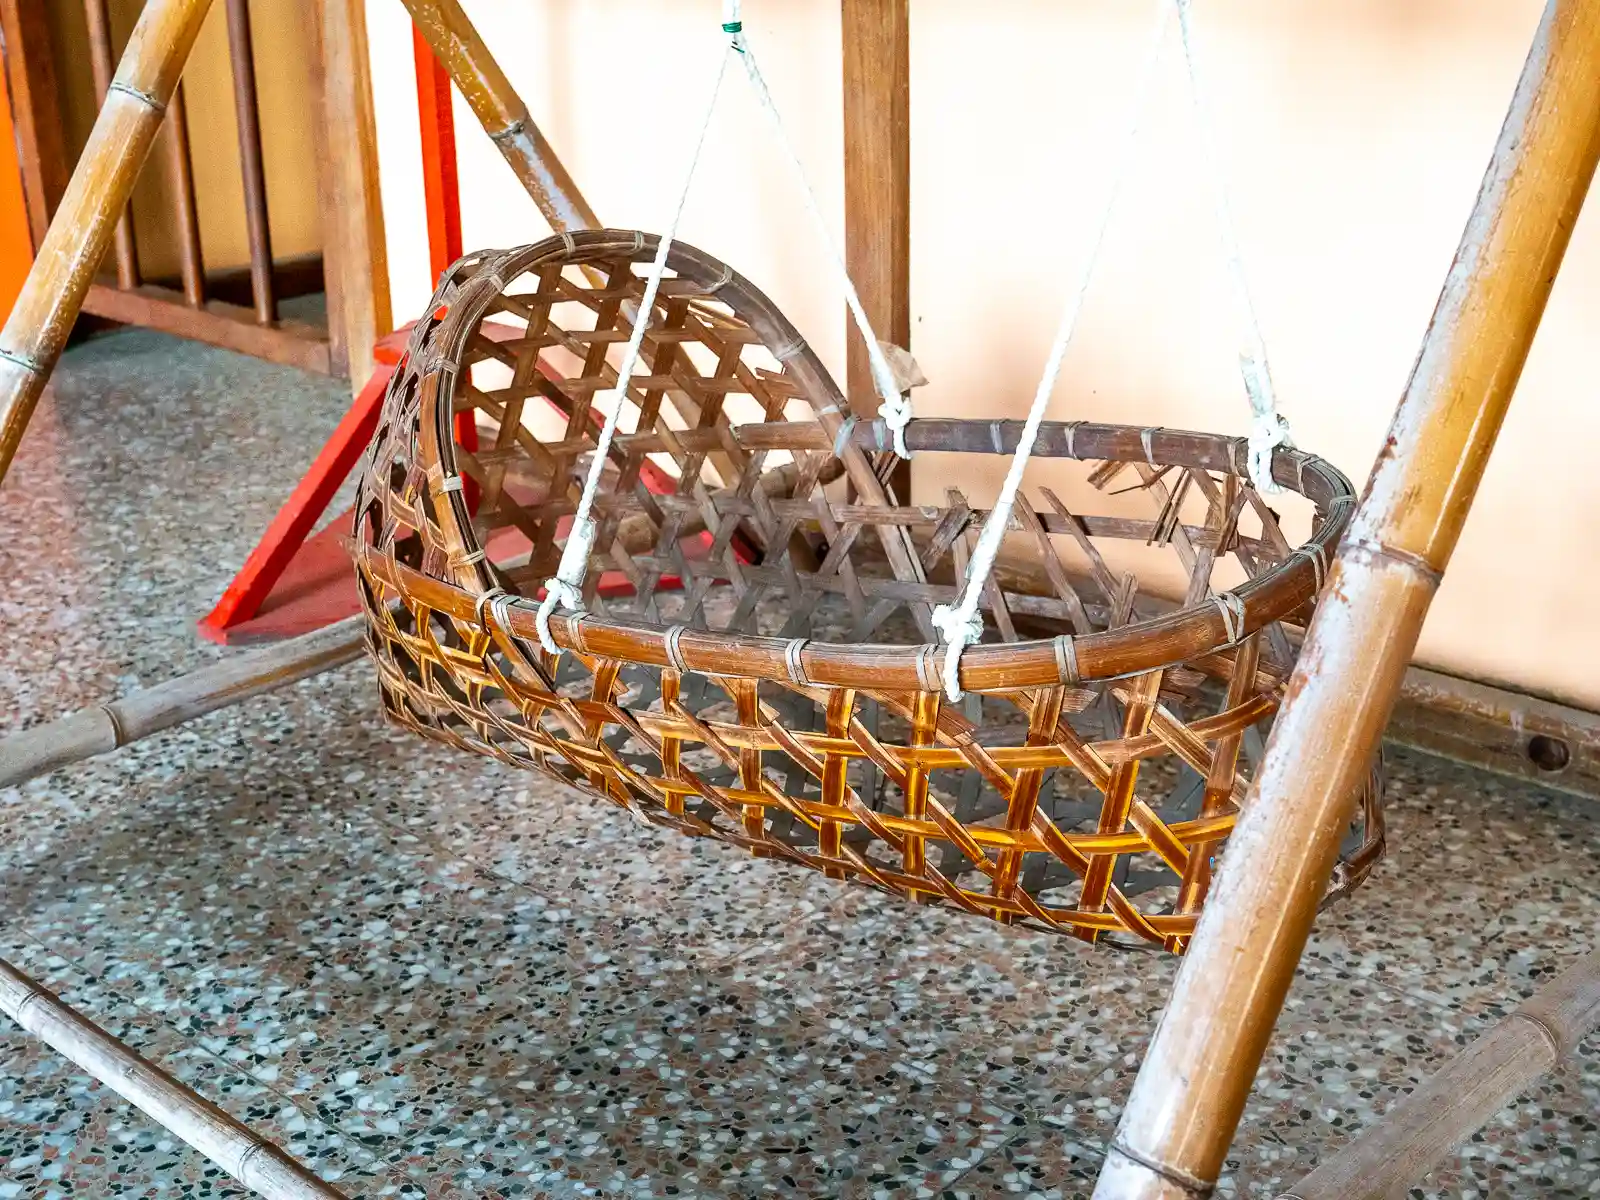 A cradle for a baby made from rattan is on display.